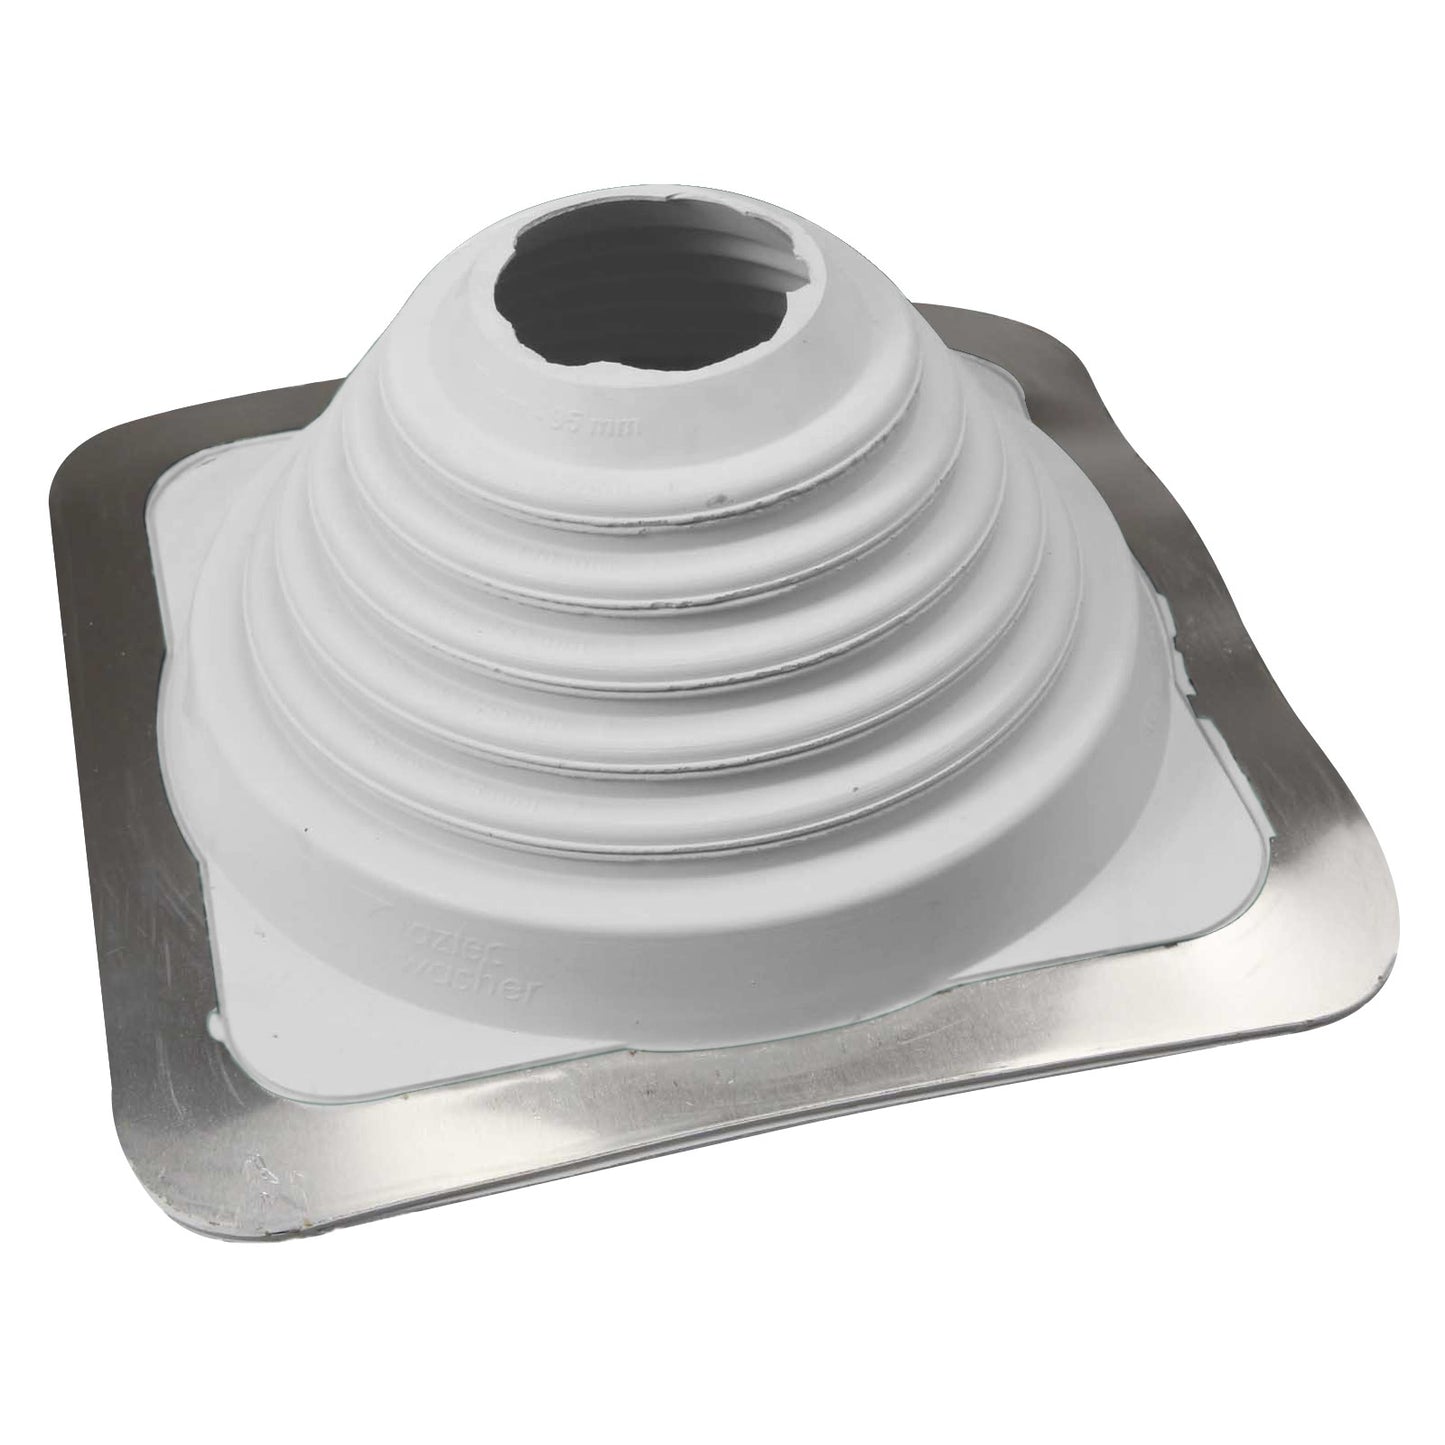 #4 Roofjack Square EPDM Pipe Flashing Boot White